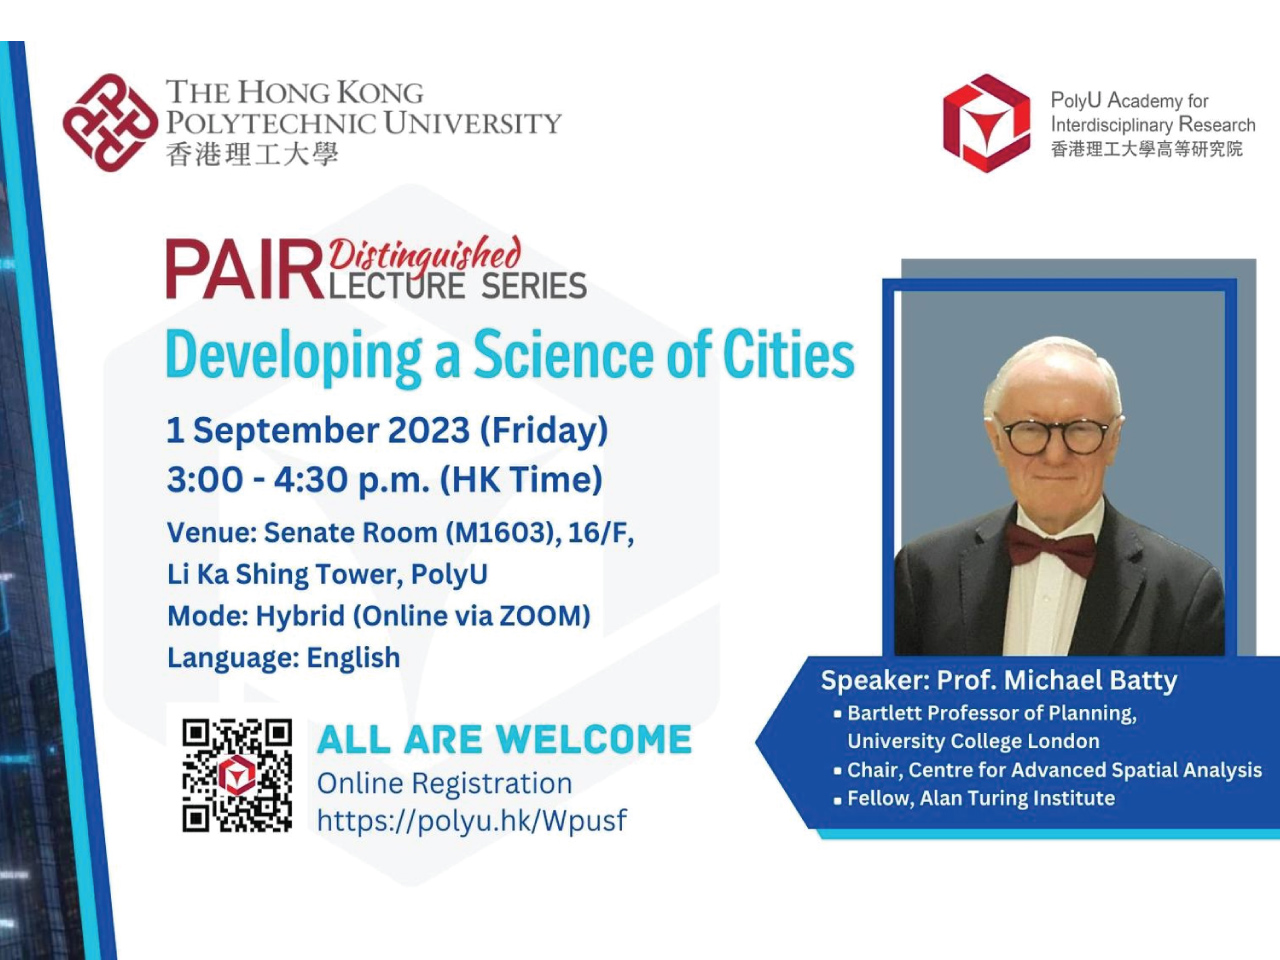 PAIR distinguished lecture series : developing a science of cities